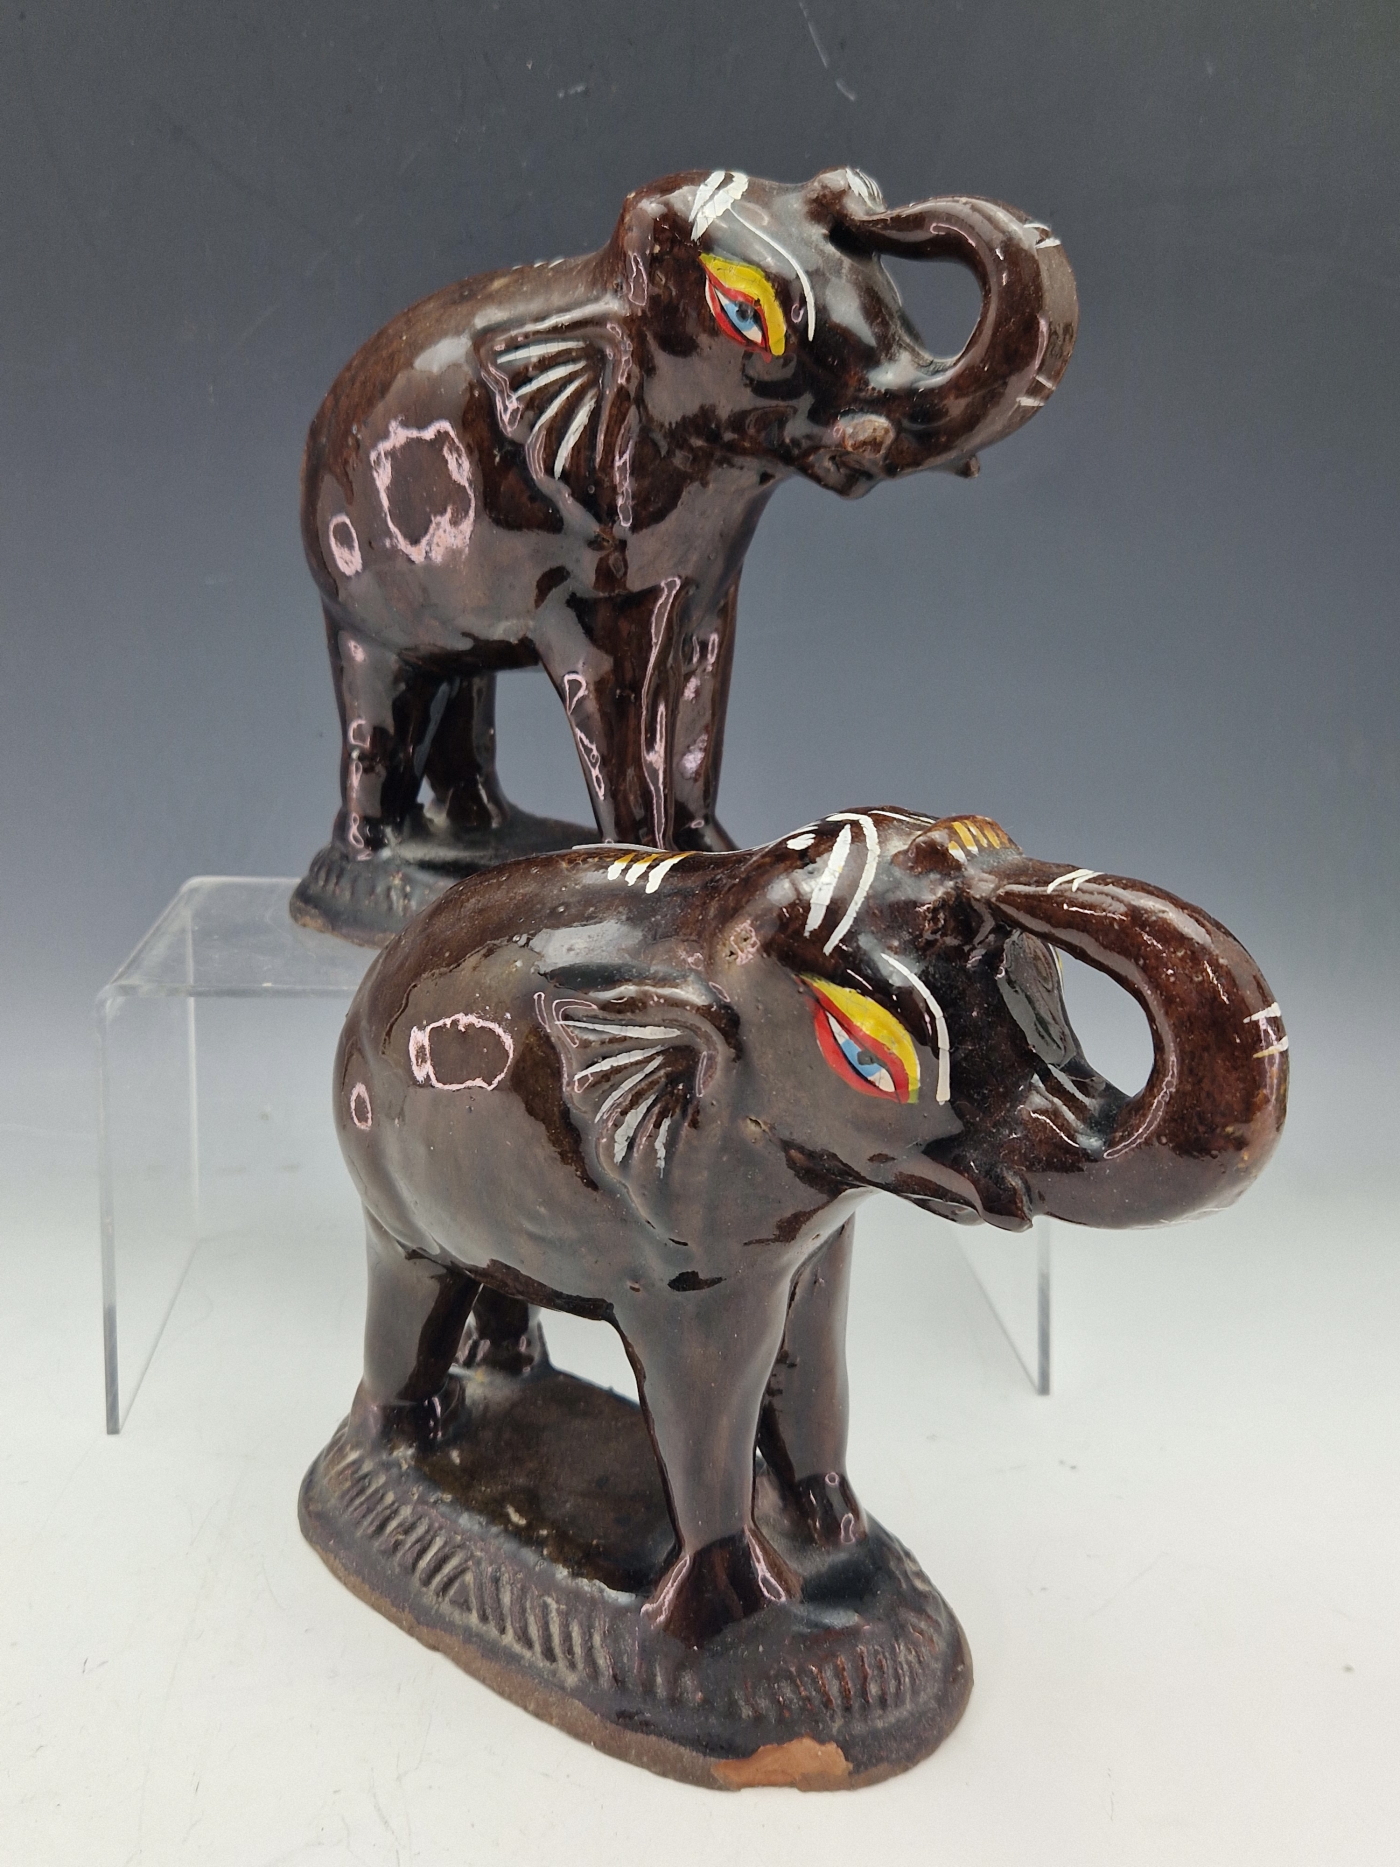 A PAIR OF TREACLE GLAZED ELEPHANT FIGURINES STANDING ON GADROON EDGED PLINTHS WITH THEIR TRUNKS - Image 2 of 3